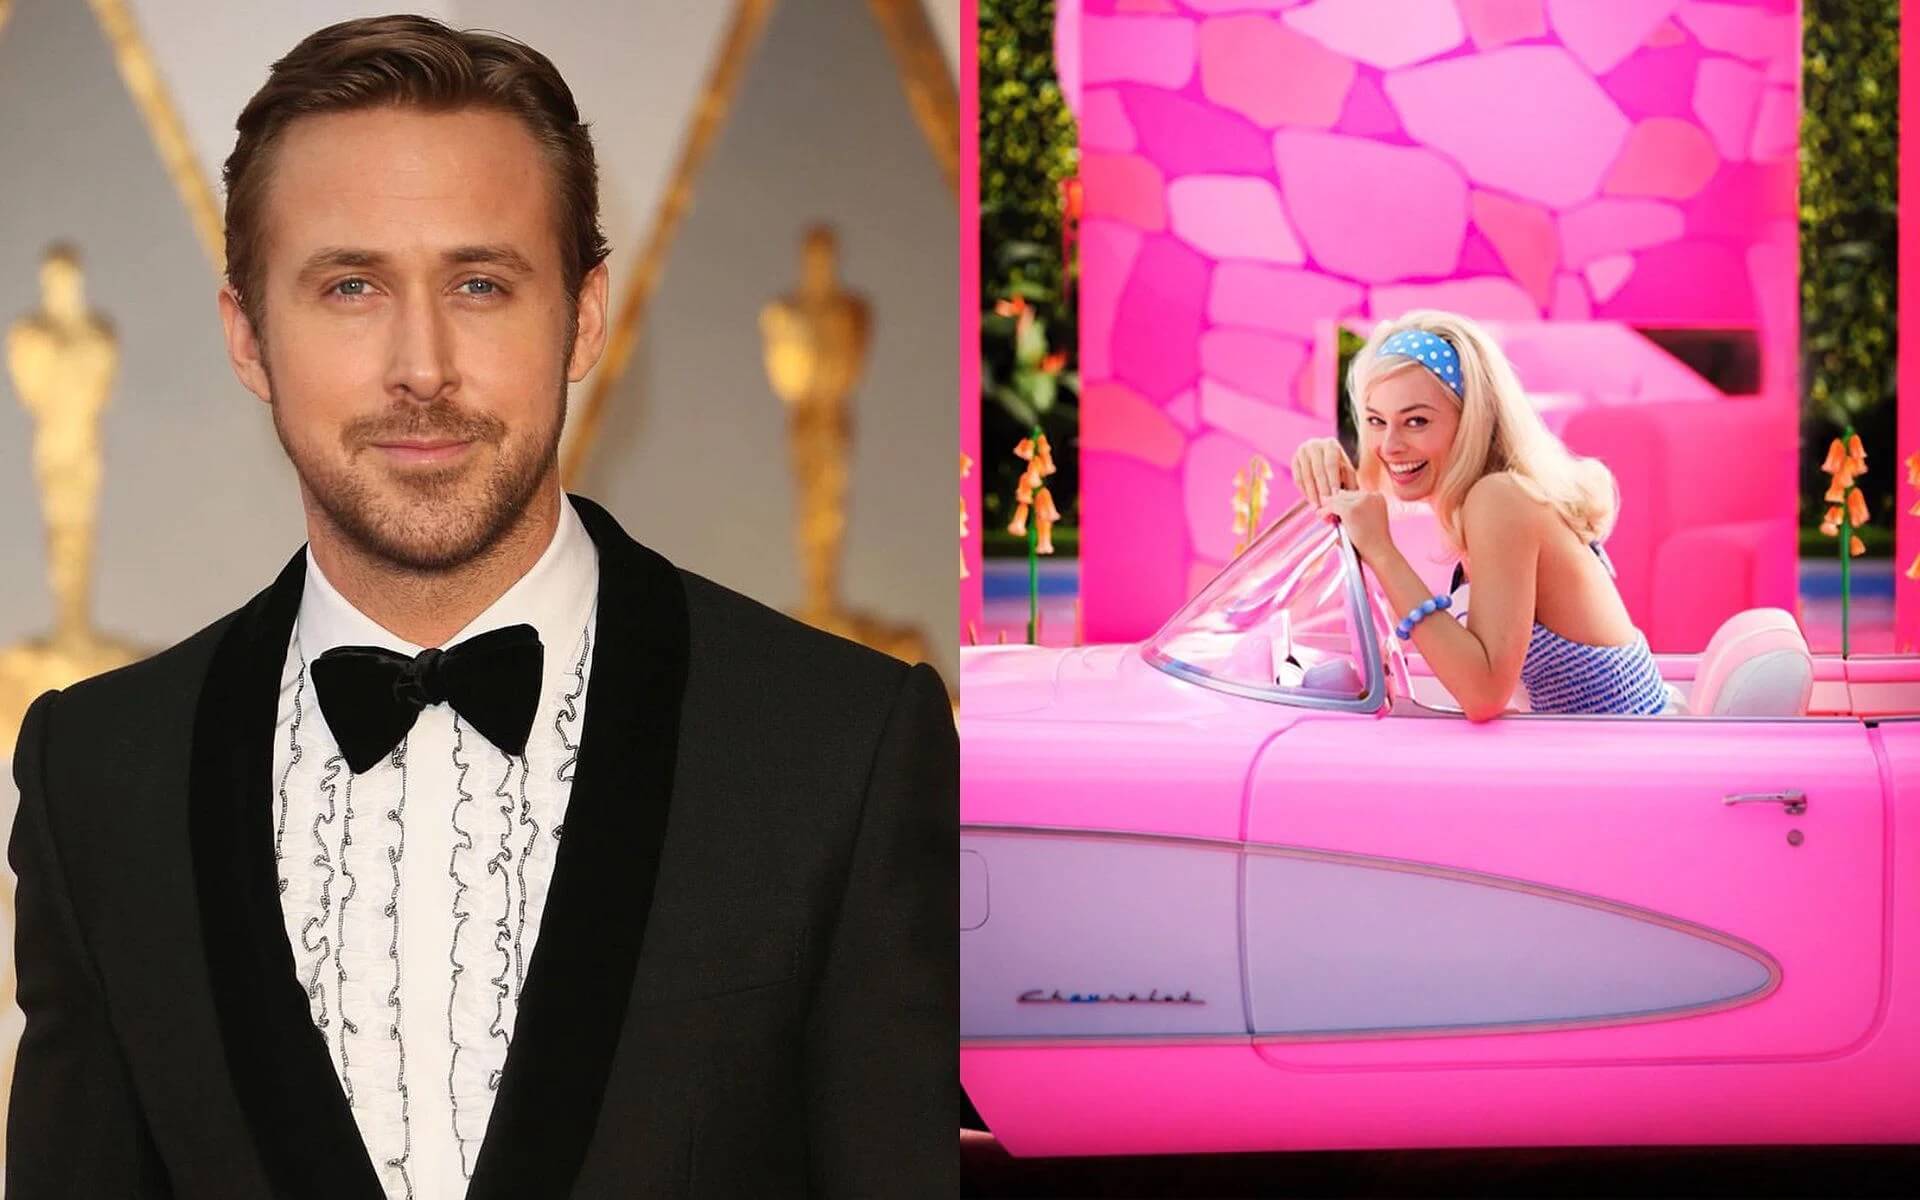 Close The Barbie Film Set Down': Barbie Fans Want WB To Learn From Doctor Strange 2 Mistakes After Photo of Margot Robbie, Ryan Gosling Goes Viral